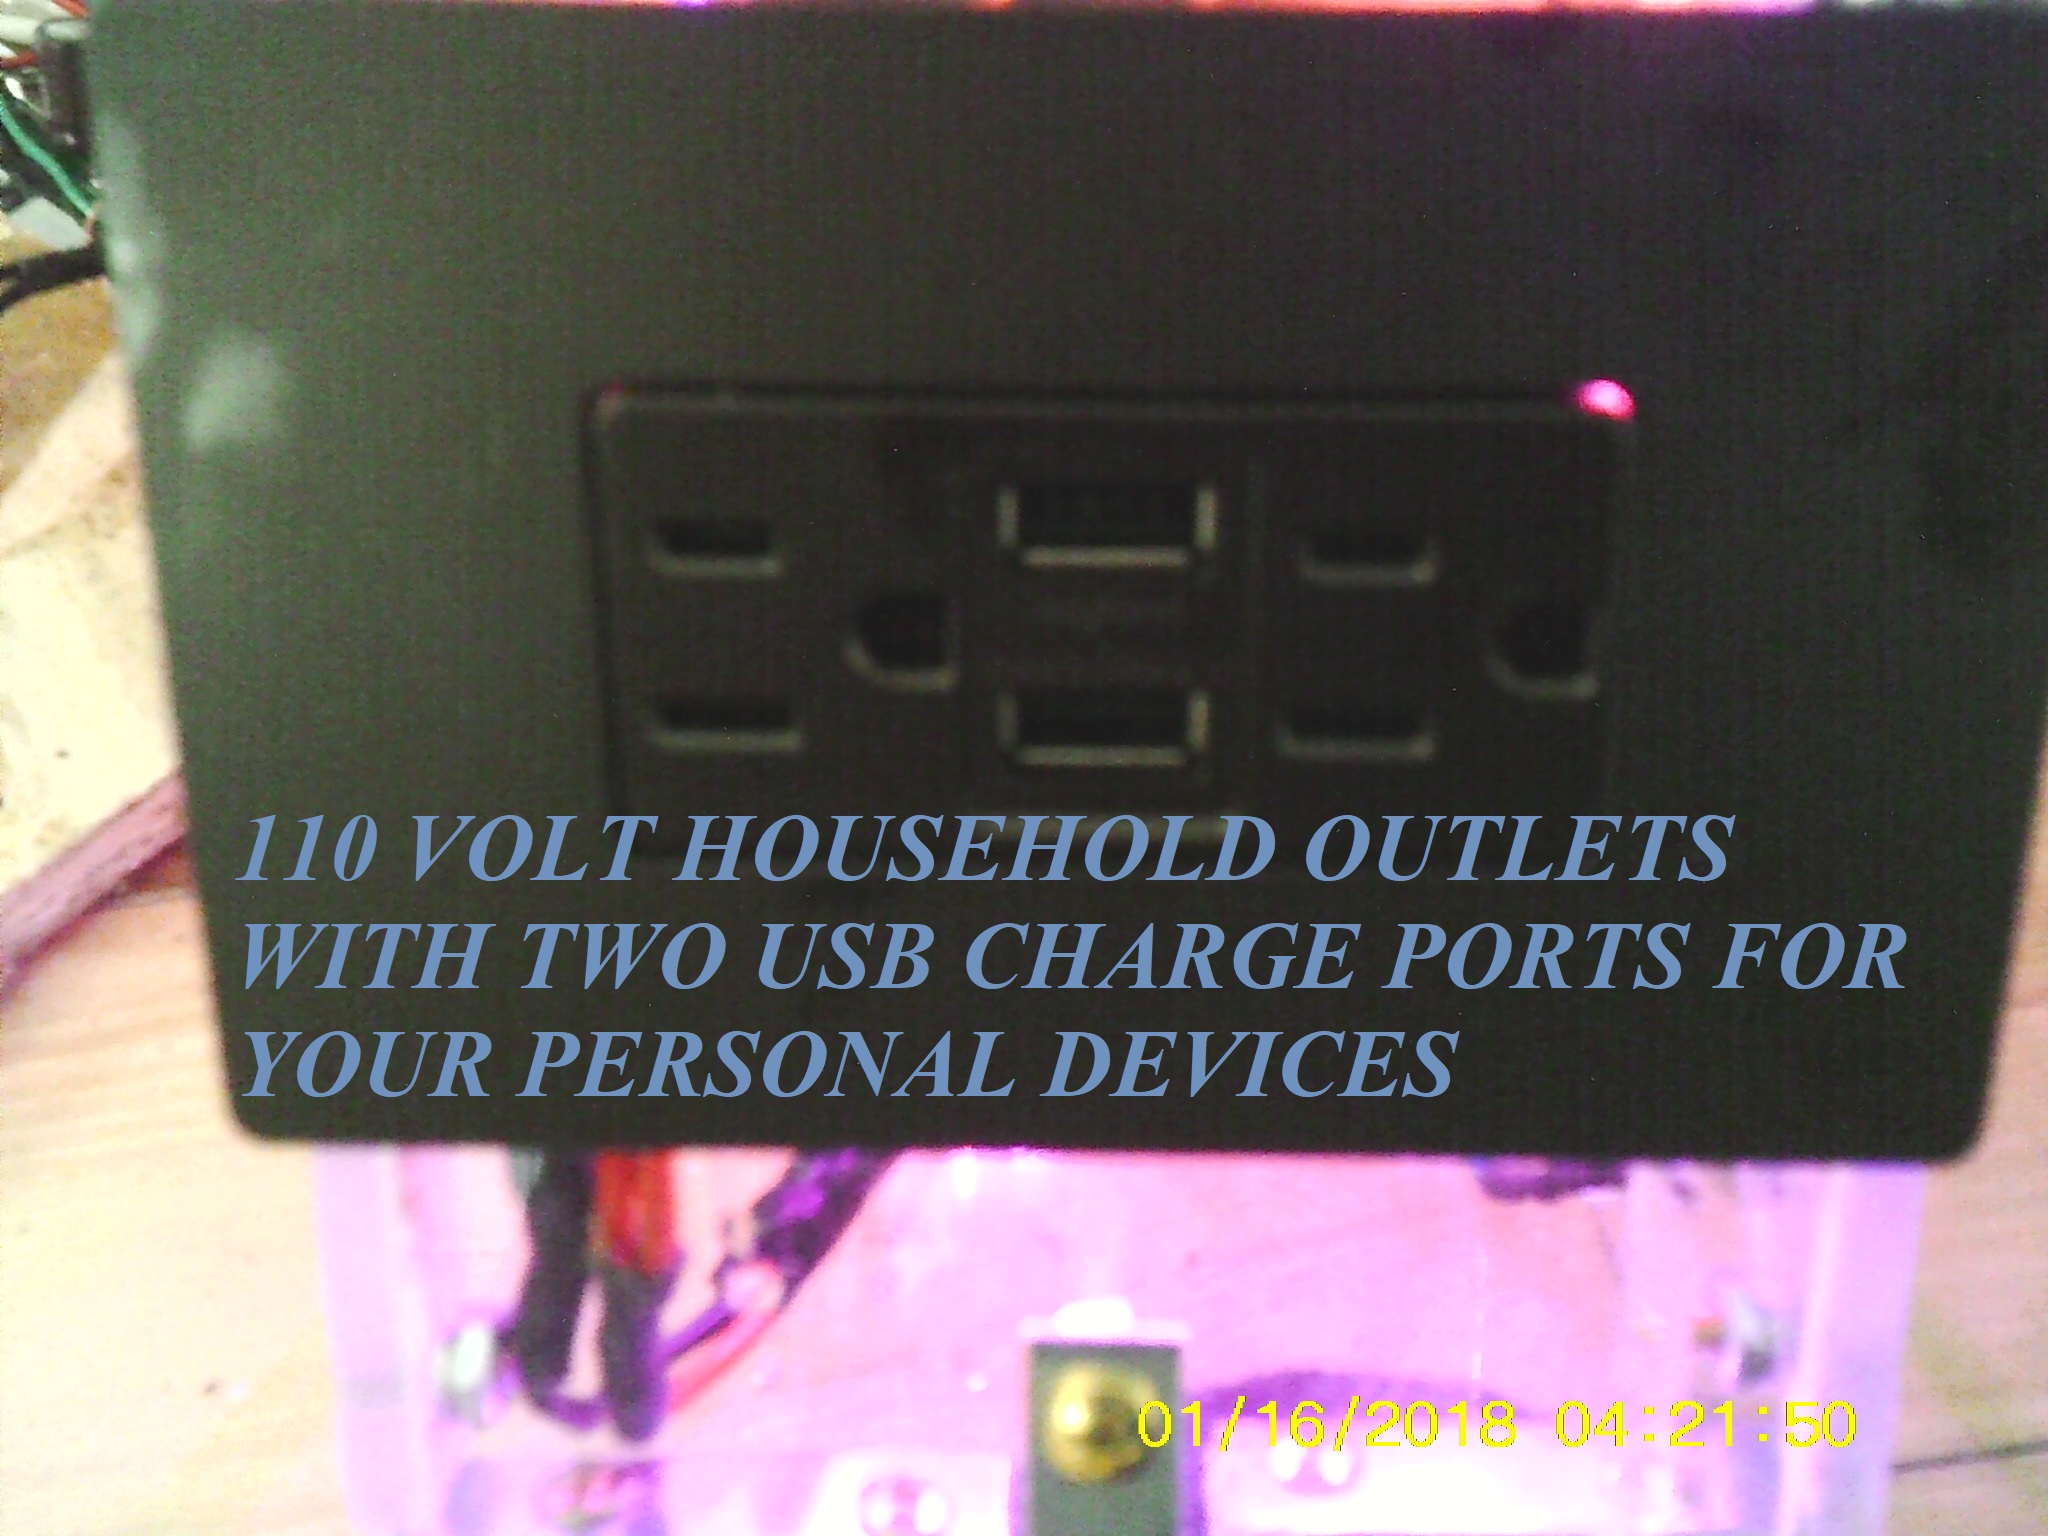 ({TEXT ADDED TO PIC} 110 VOLT HOUSEHOLD OUTLETS WITH TWO USB CHARGE PORTS FOR YOUR PERSONAL DEVICES)110 volt plugs with usb charge ports in center of plug